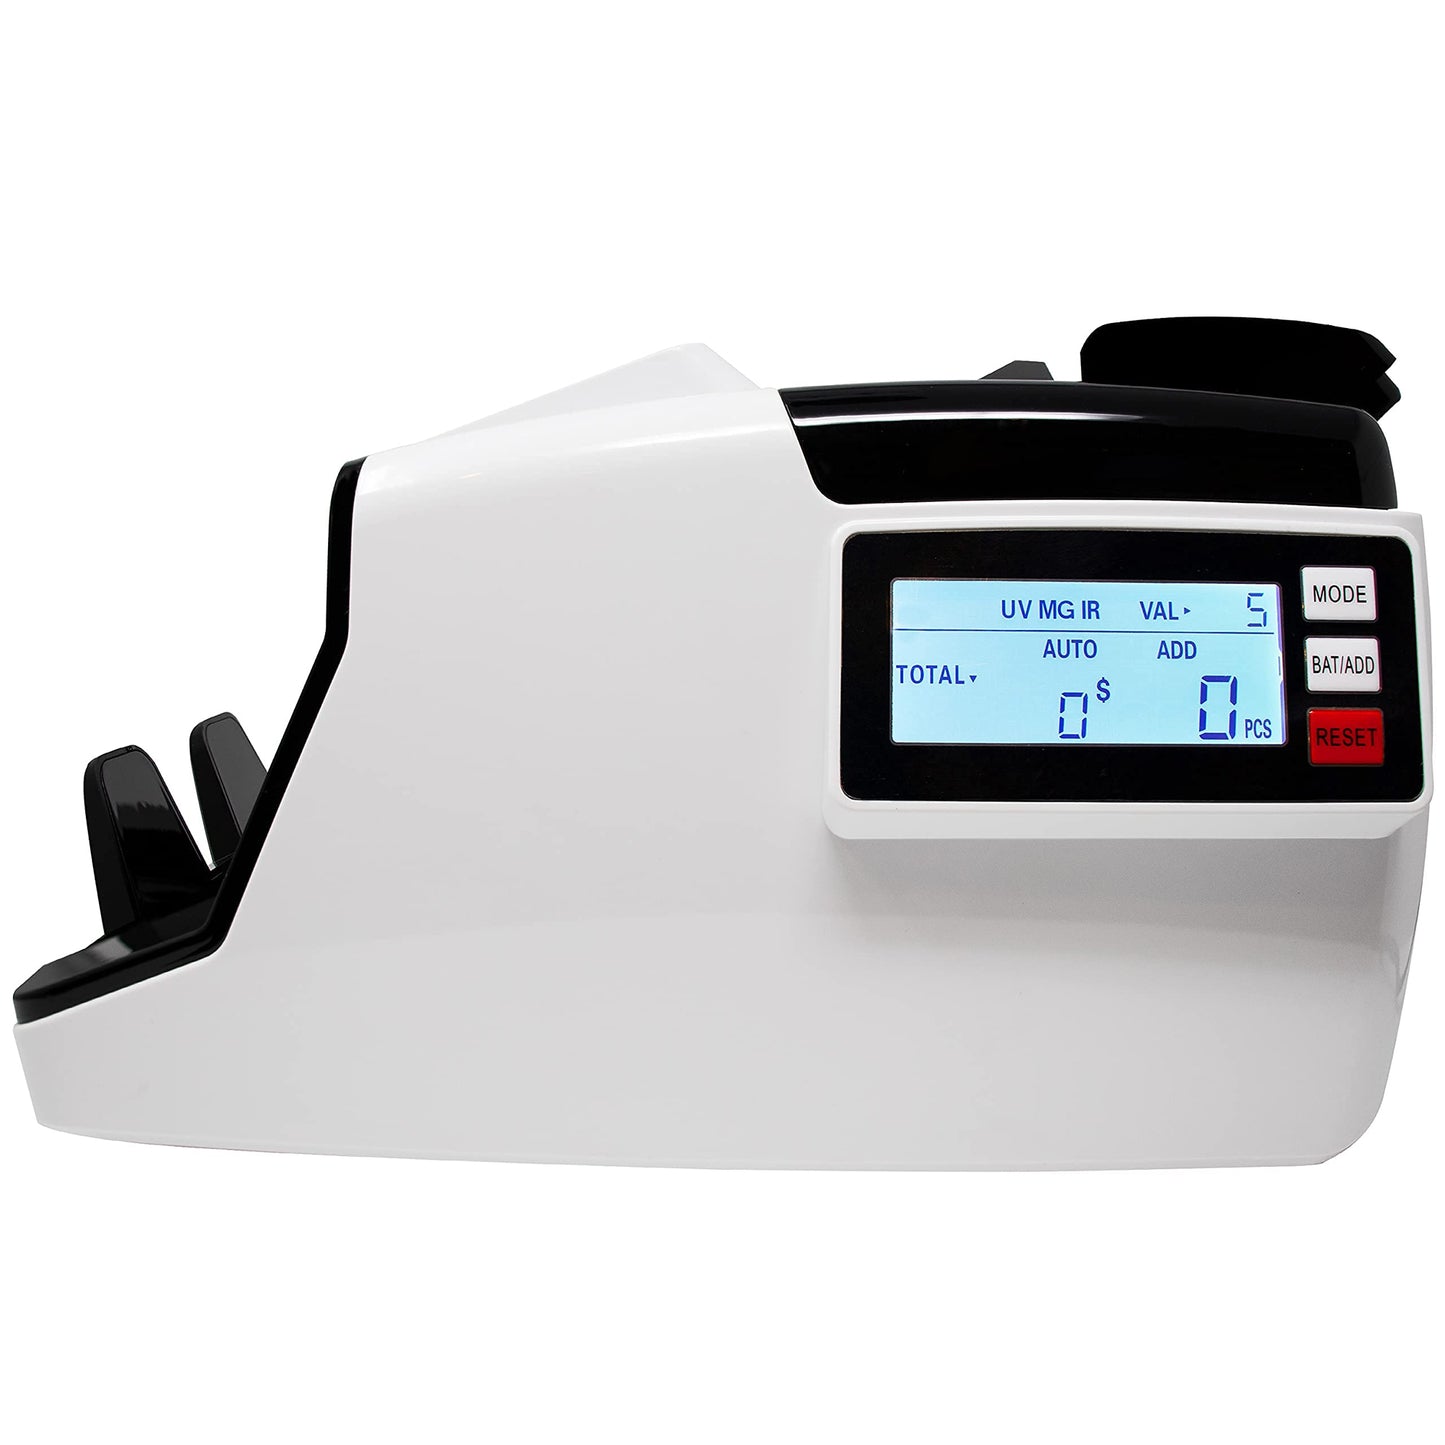 Nadex V3600 Value Display Money Counter and Counterfeit Detector, High Speed Bill Counter